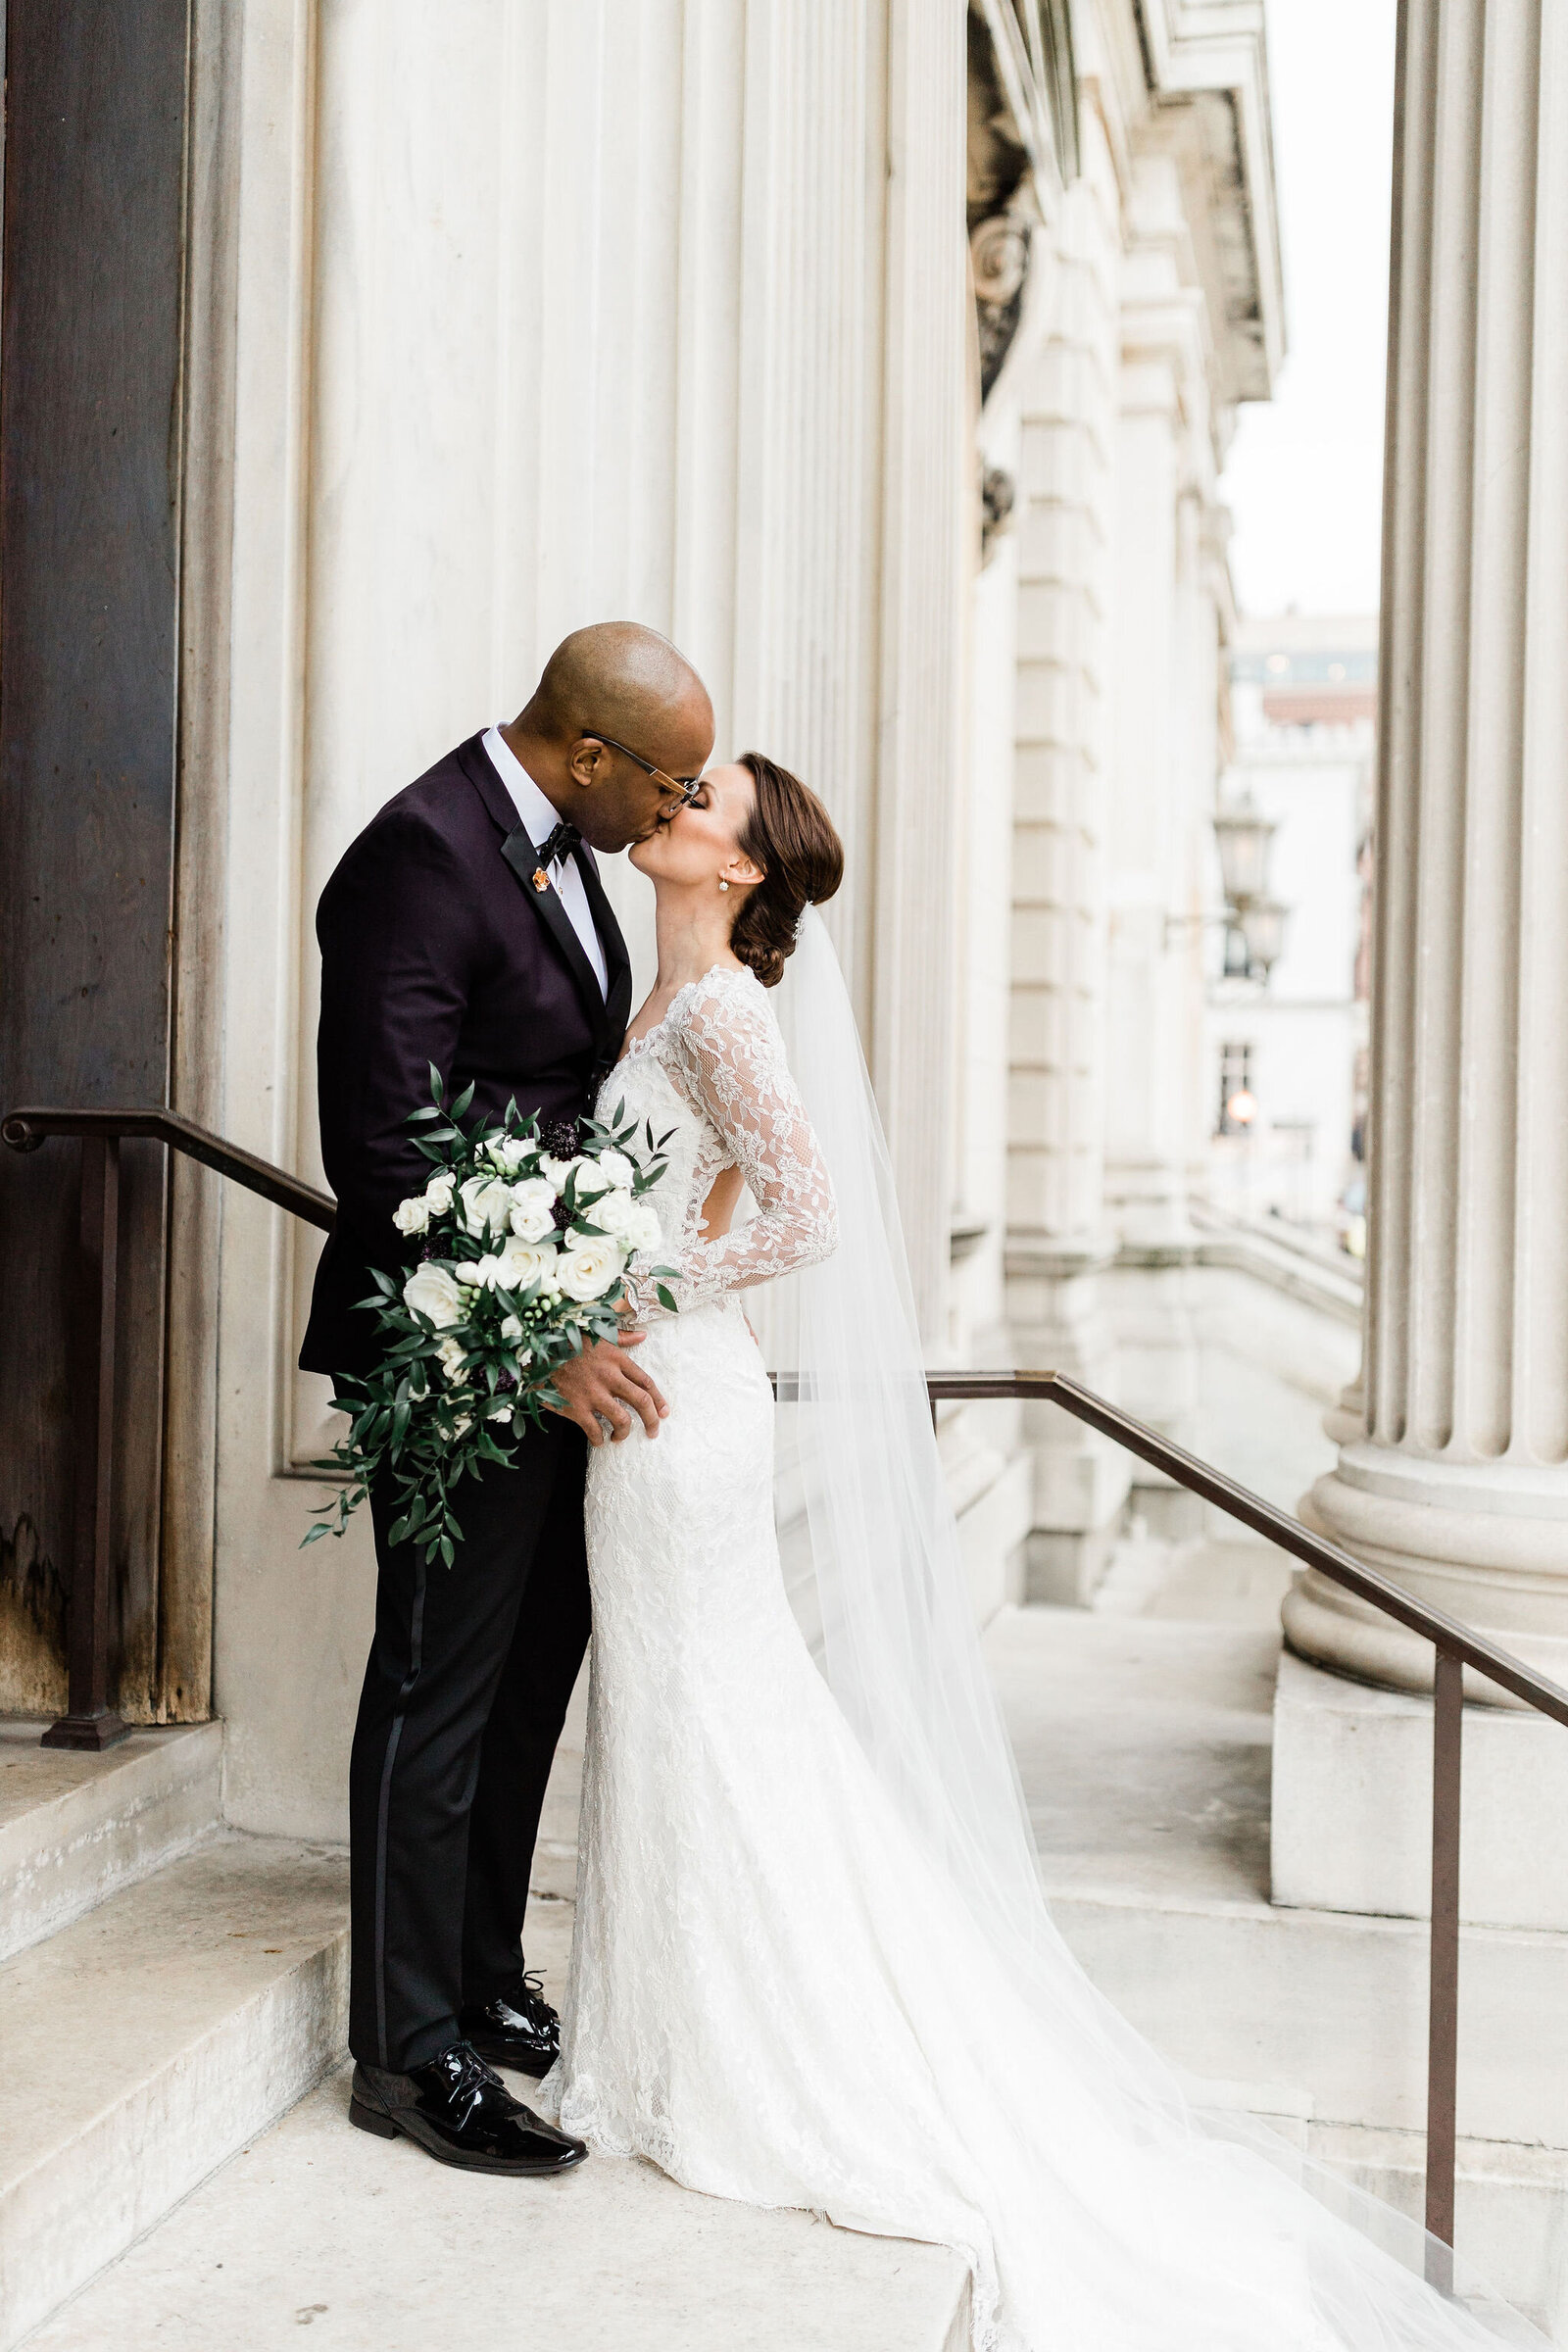 Incredible wedding Day Photos | The Peabody Library Baltimore MD | The Axtells Photo and Film